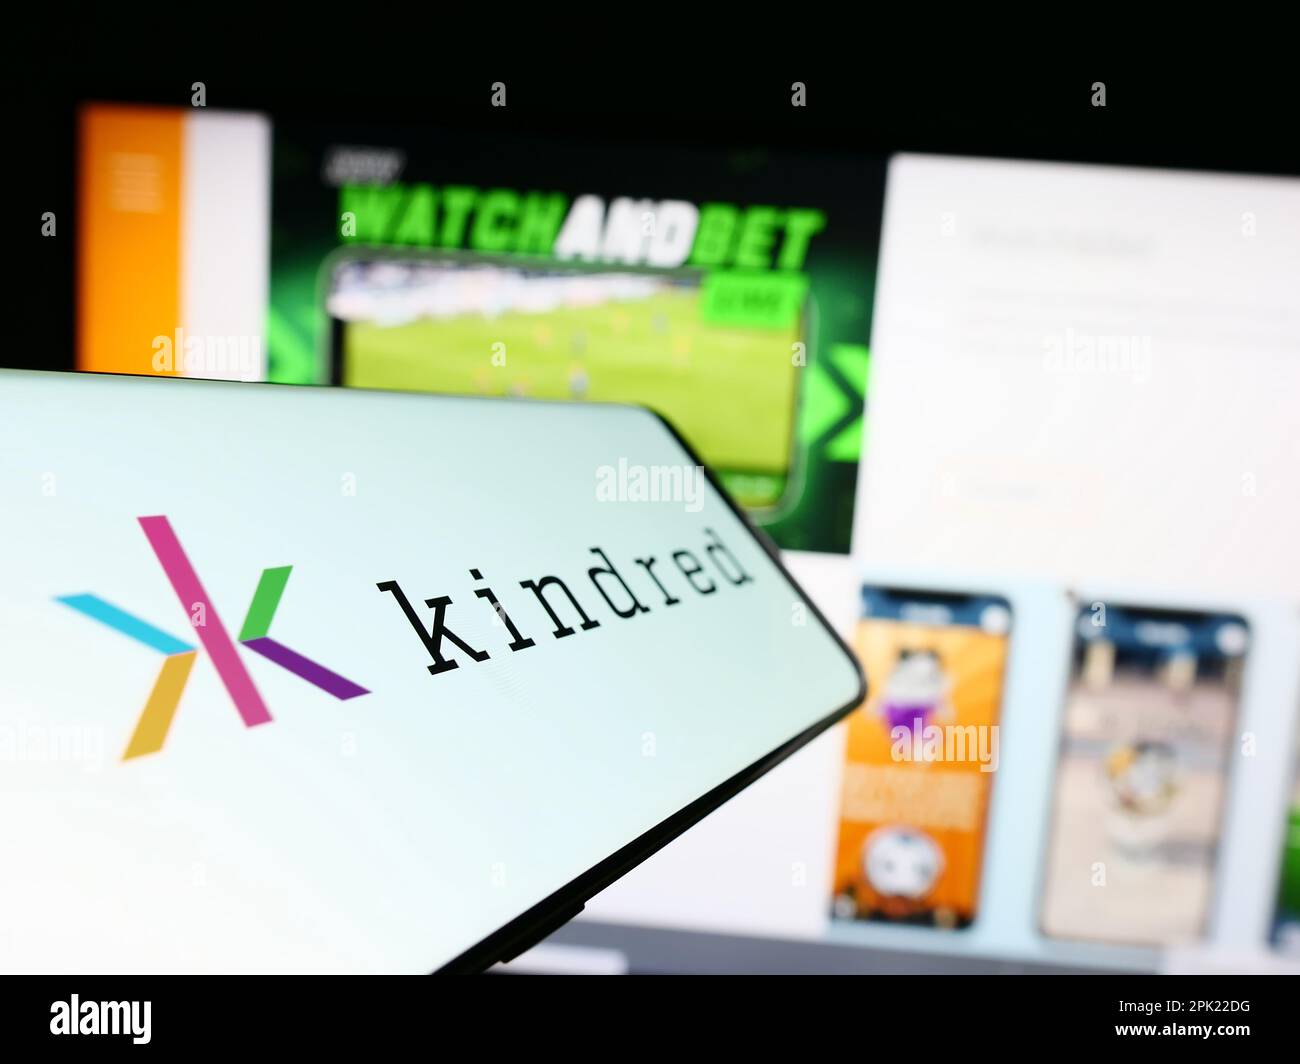 Cellphone with logo of online gambling company Kindred Group plc on screen in front of business website. Focus on center-left of phone display. Stock Photo